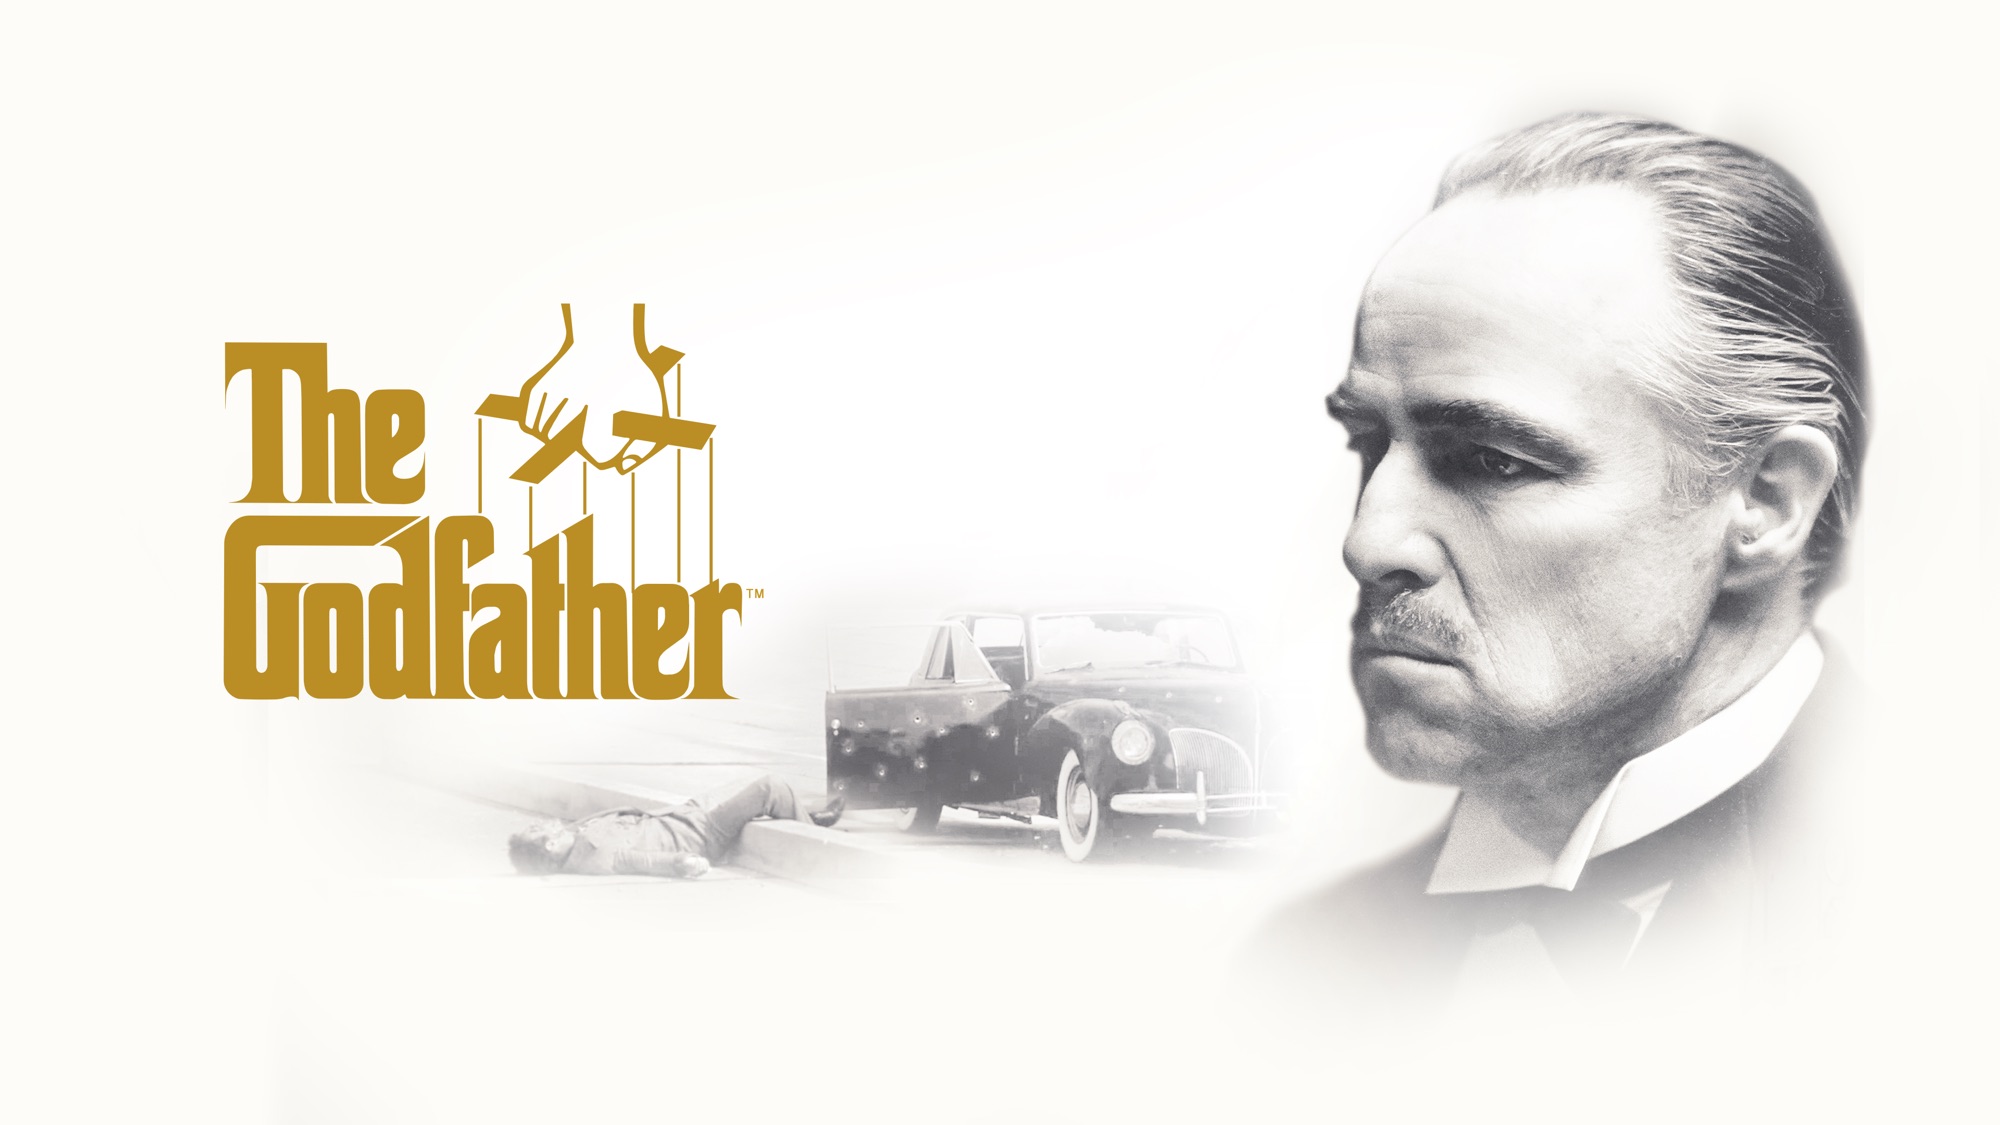 Free download wallpaper Movie, The Godfather on your PC desktop